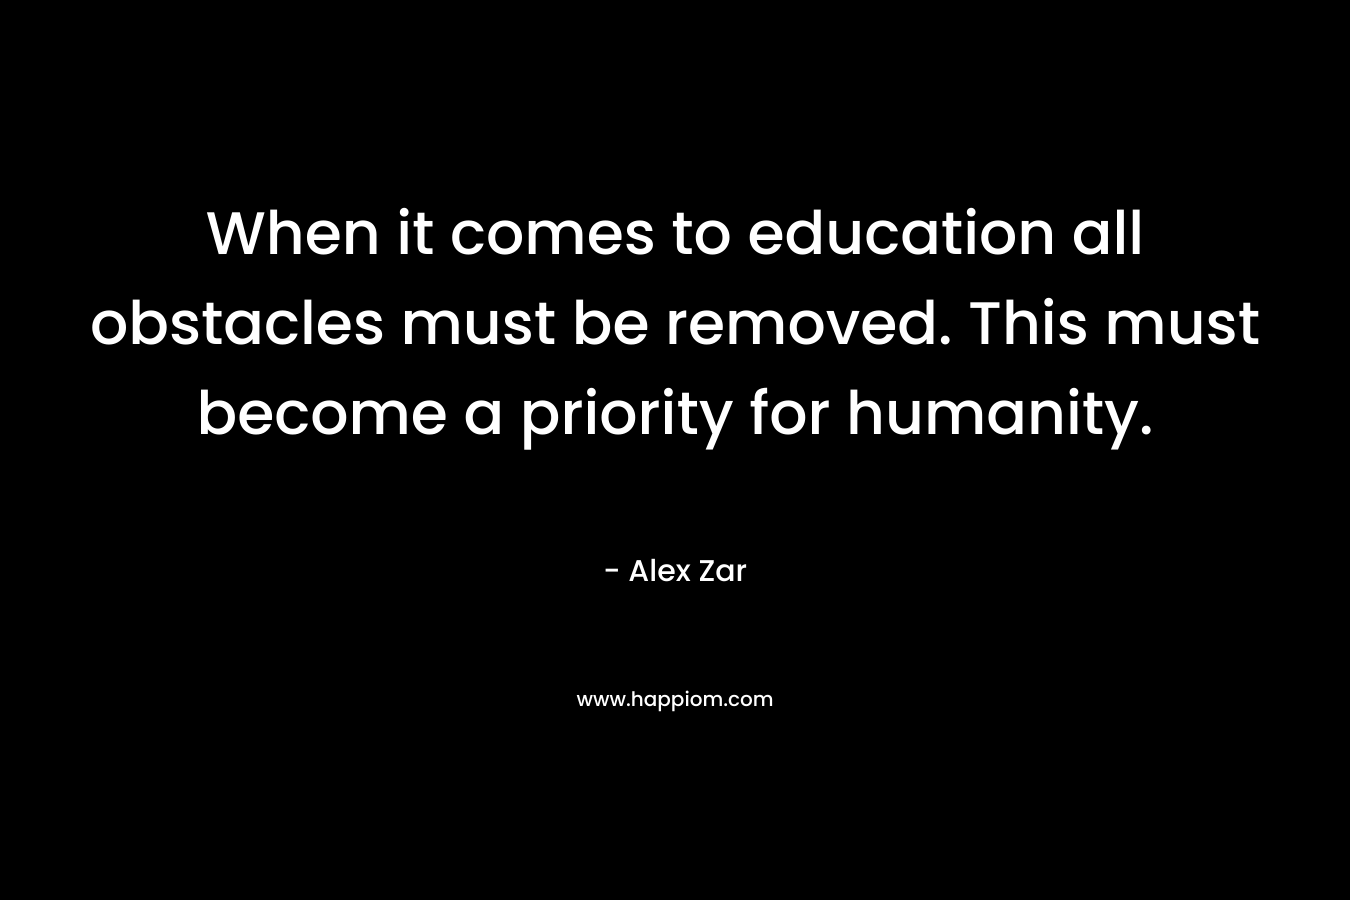 When it comes to education all obstacles must be removed. This must become a priority for humanity.